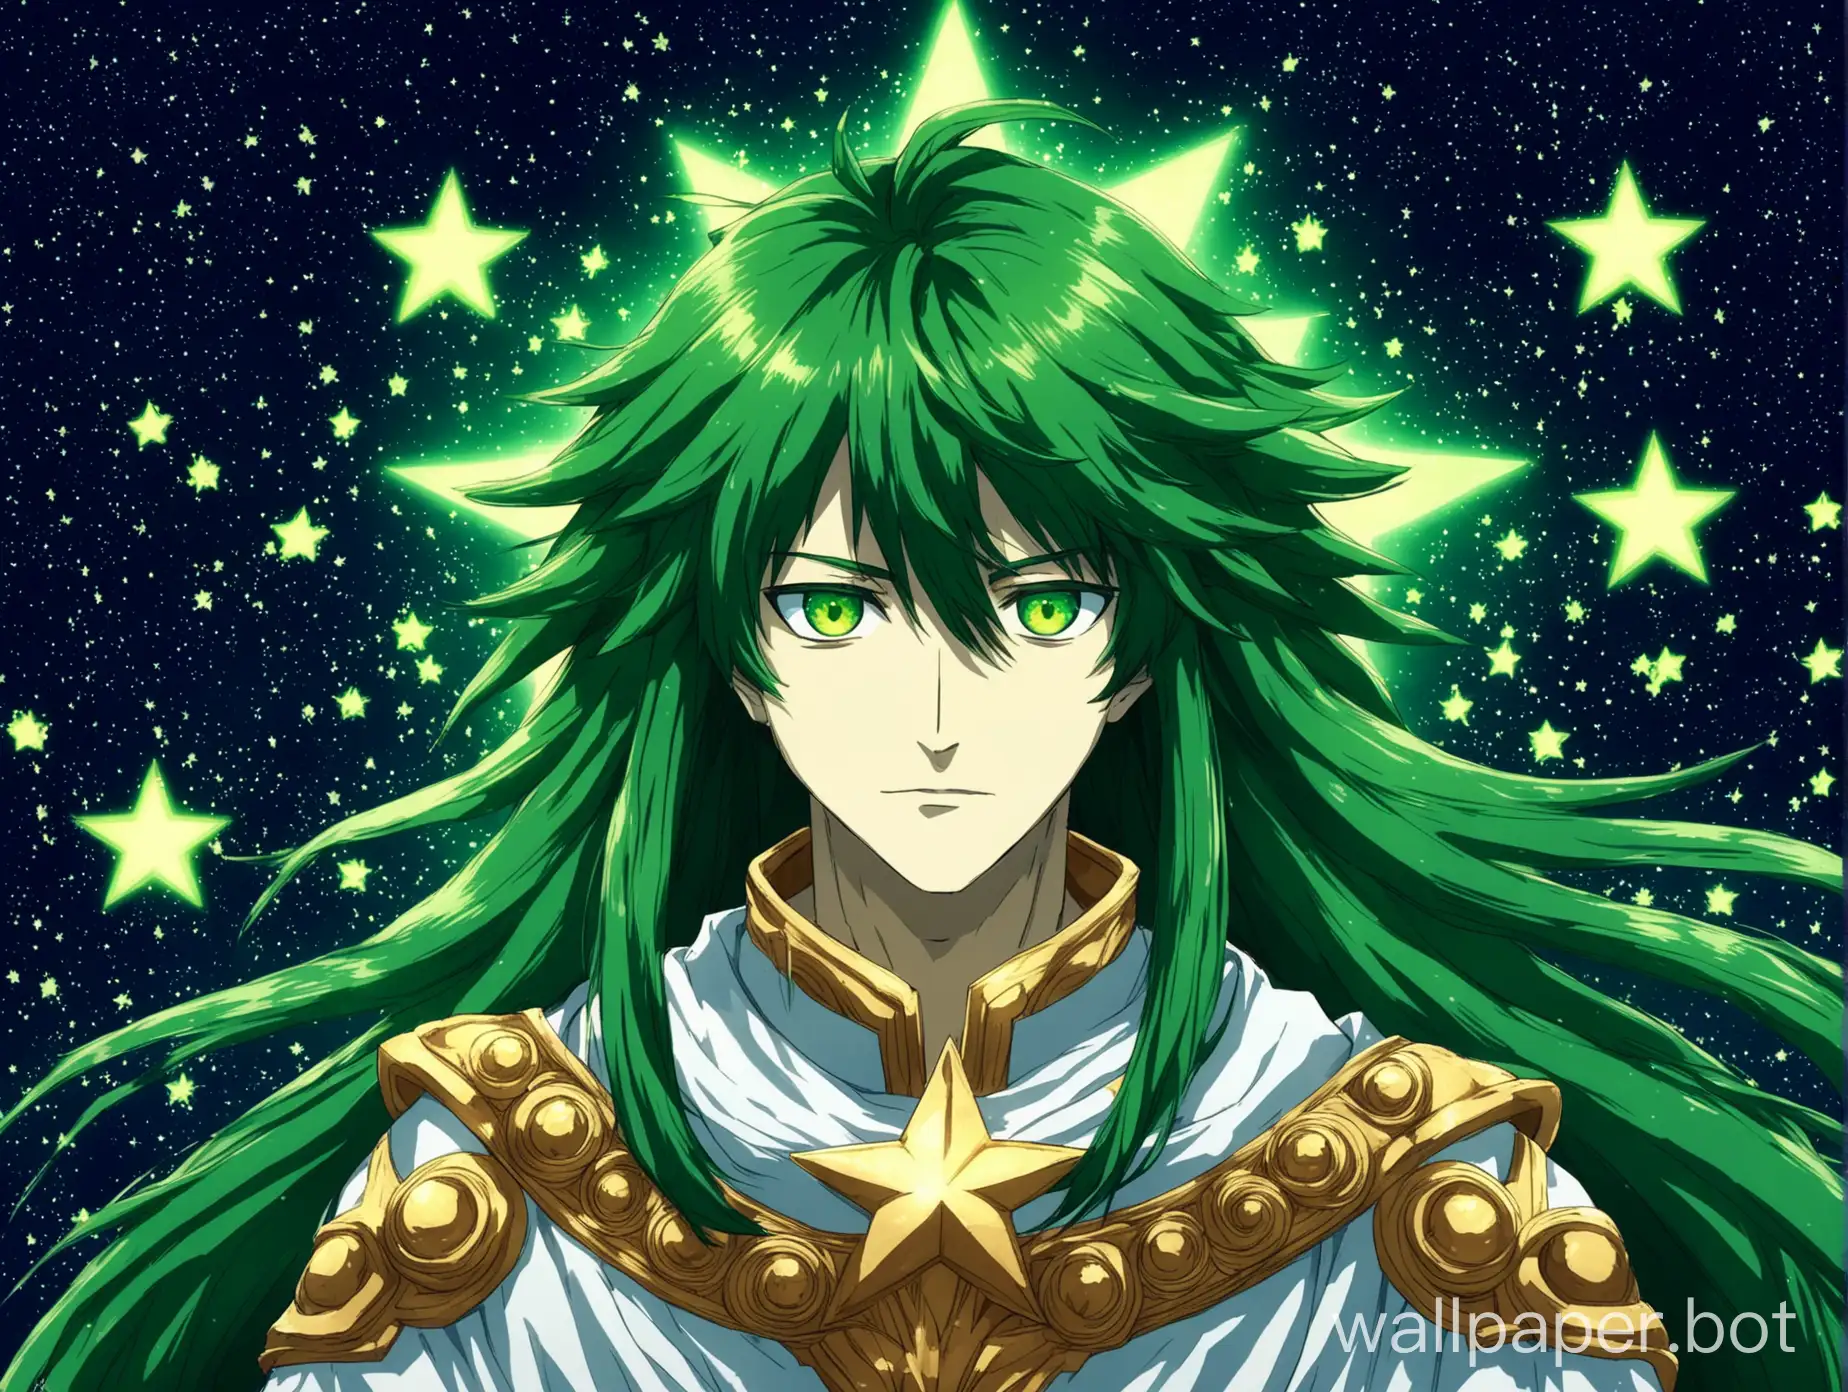 Anime-Style-God-with-Green-Eyes-and-Long-Green-Hair-in-Starry-Background-Wallpaper